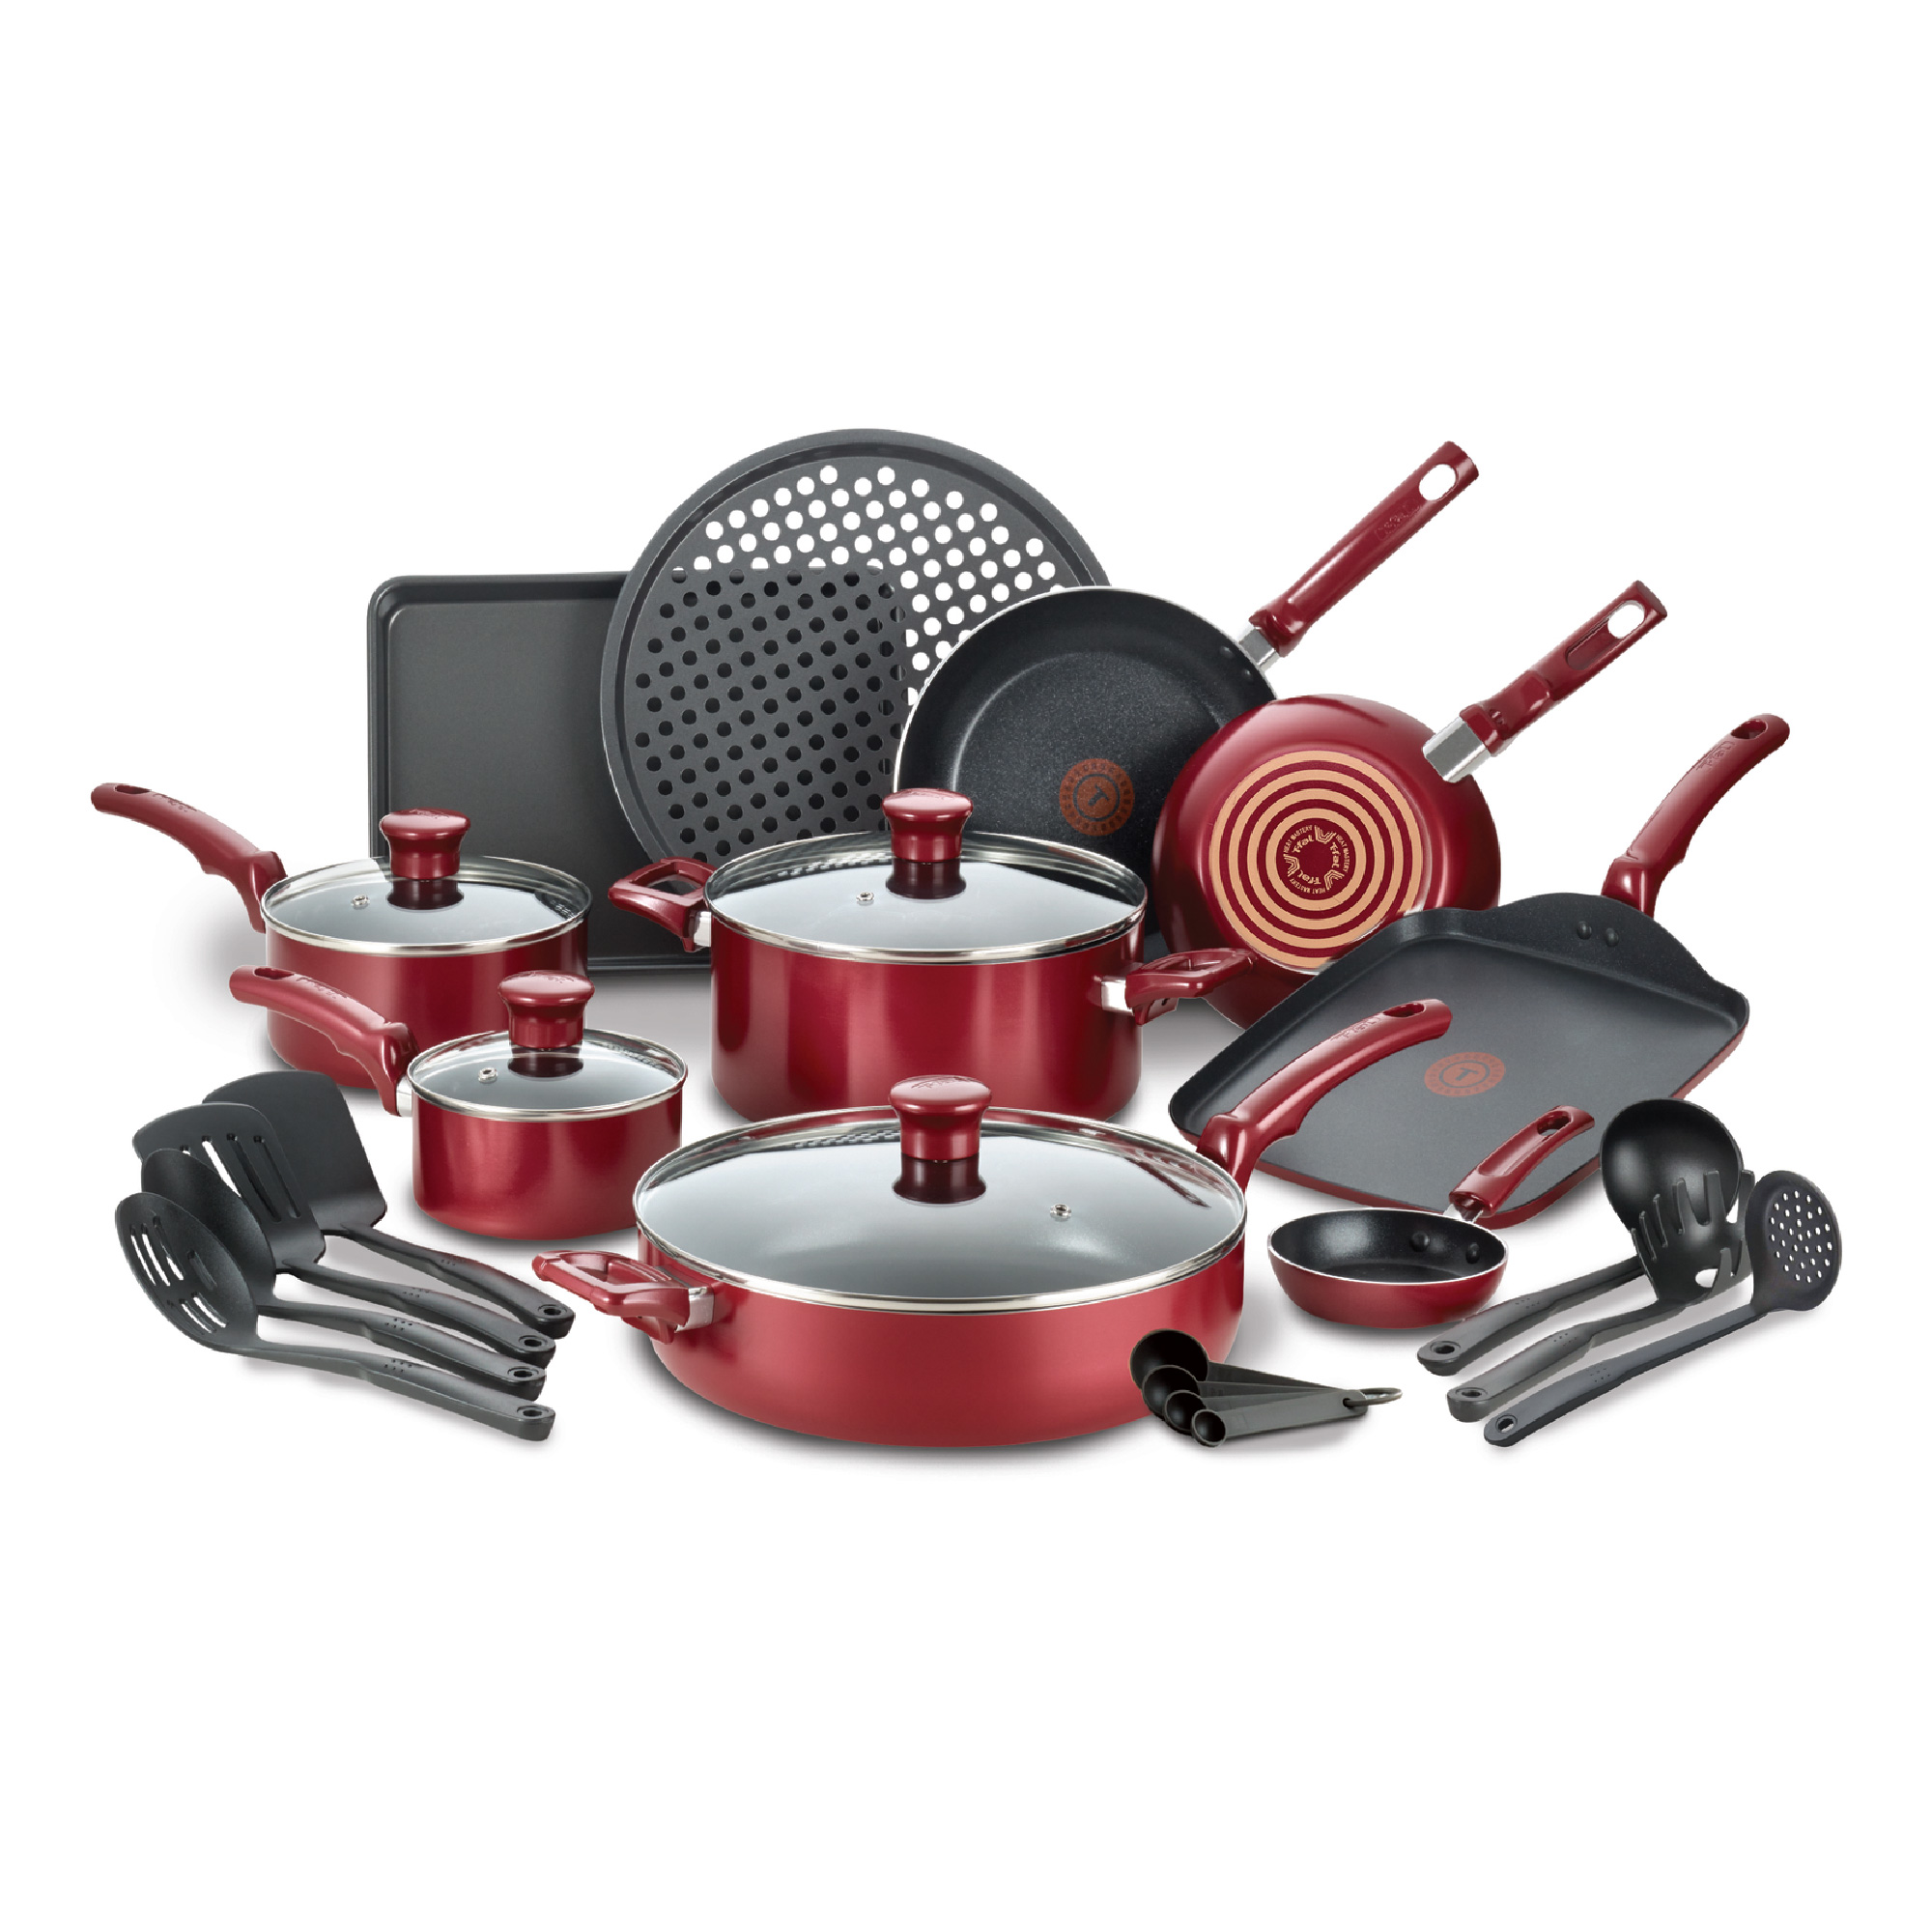 T-fal Kitchen Solutions 22-Piece Nonstick Cookware Set, Thermospot, Red - image 1 of 11